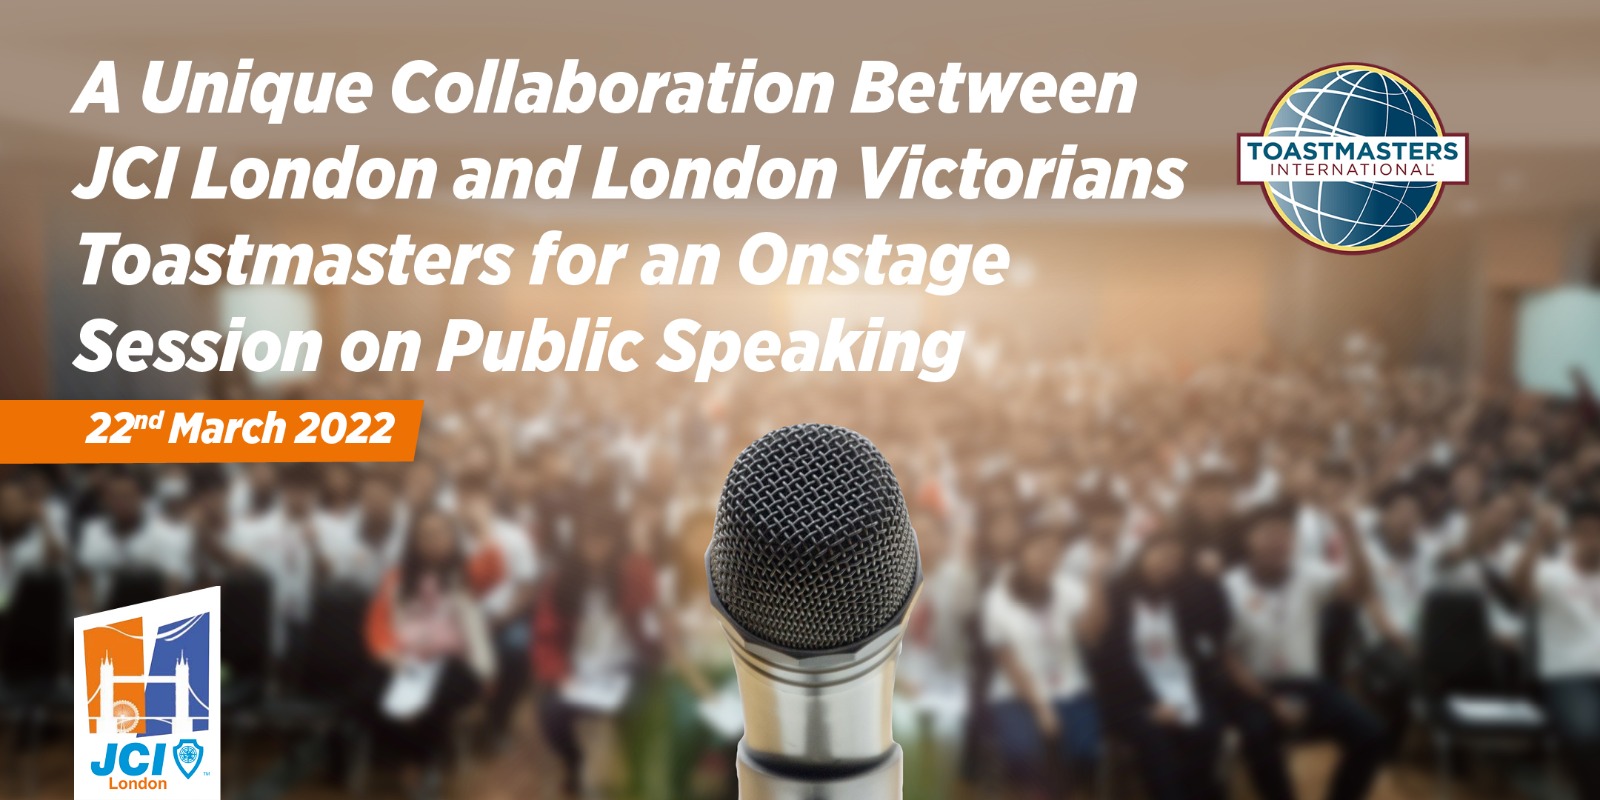 A Unique Collaboration Between JCI London and London Victorians Toastmasters for an Onstage Session on Public Speaking